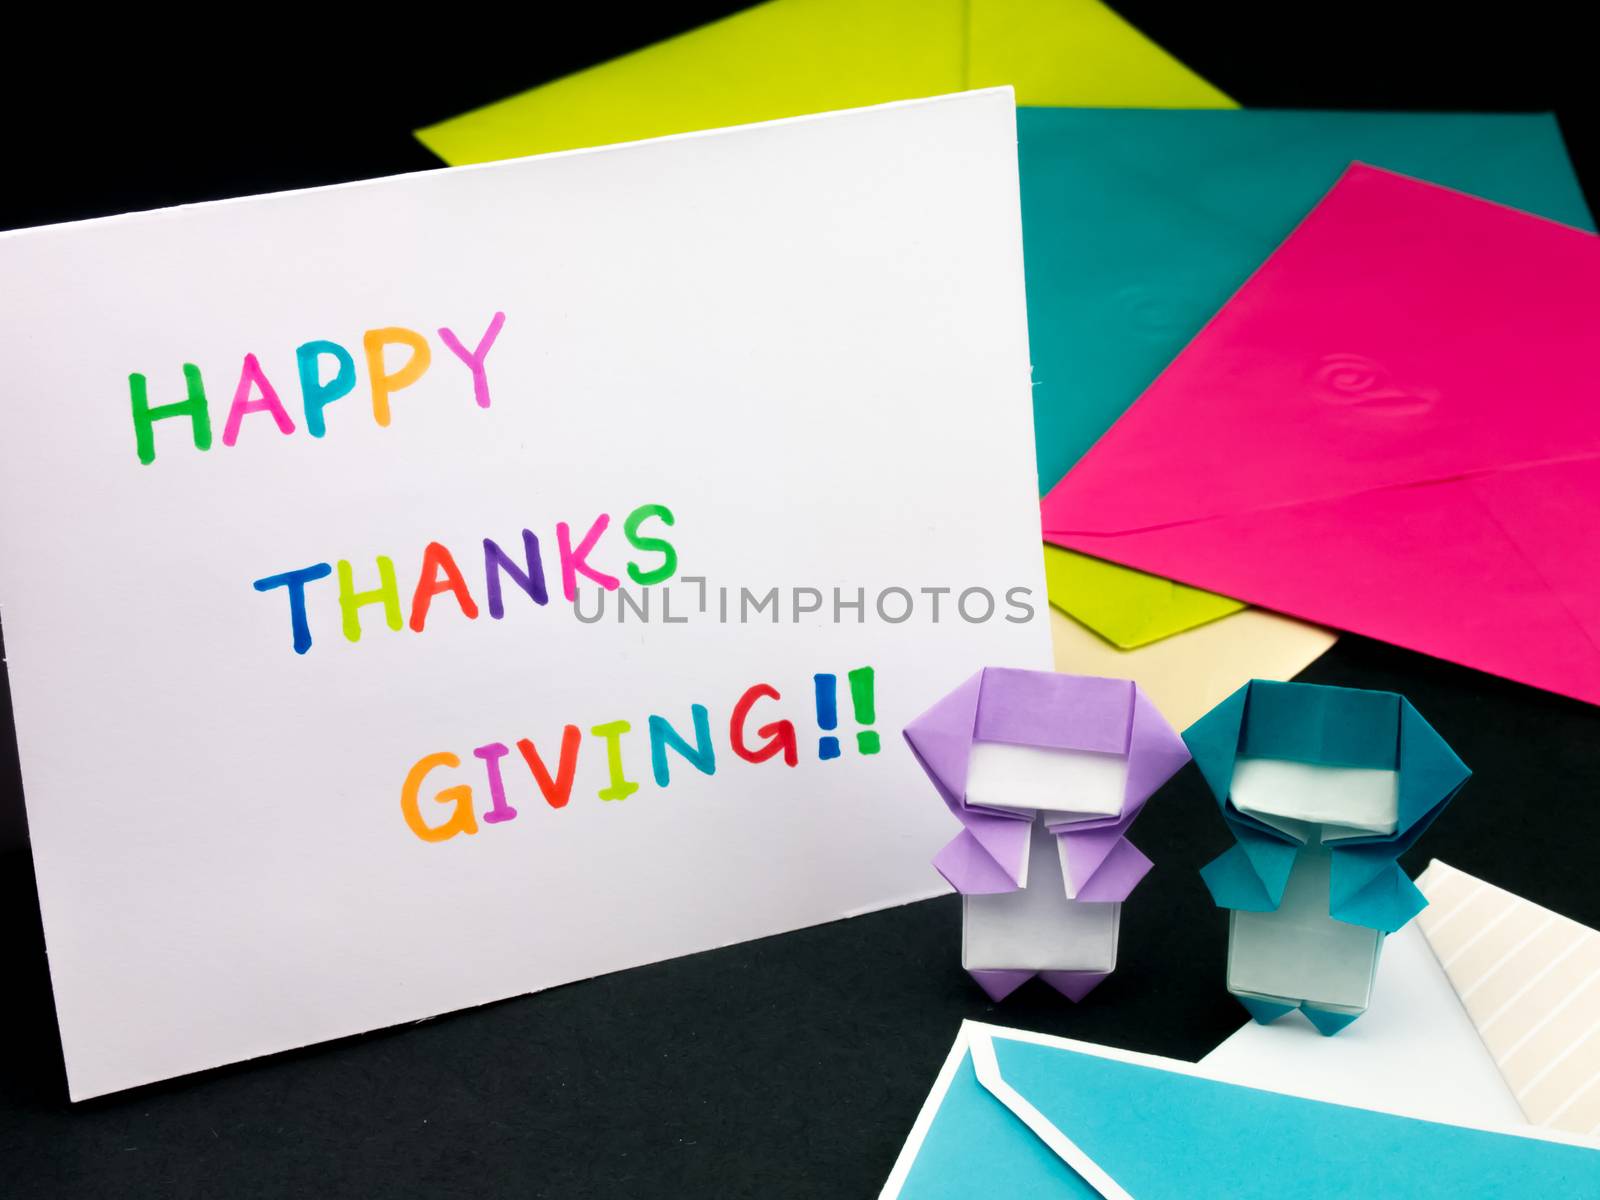 Message Card for Your Family and Friends; Happy Thanksgiving by EikoTsuttiy